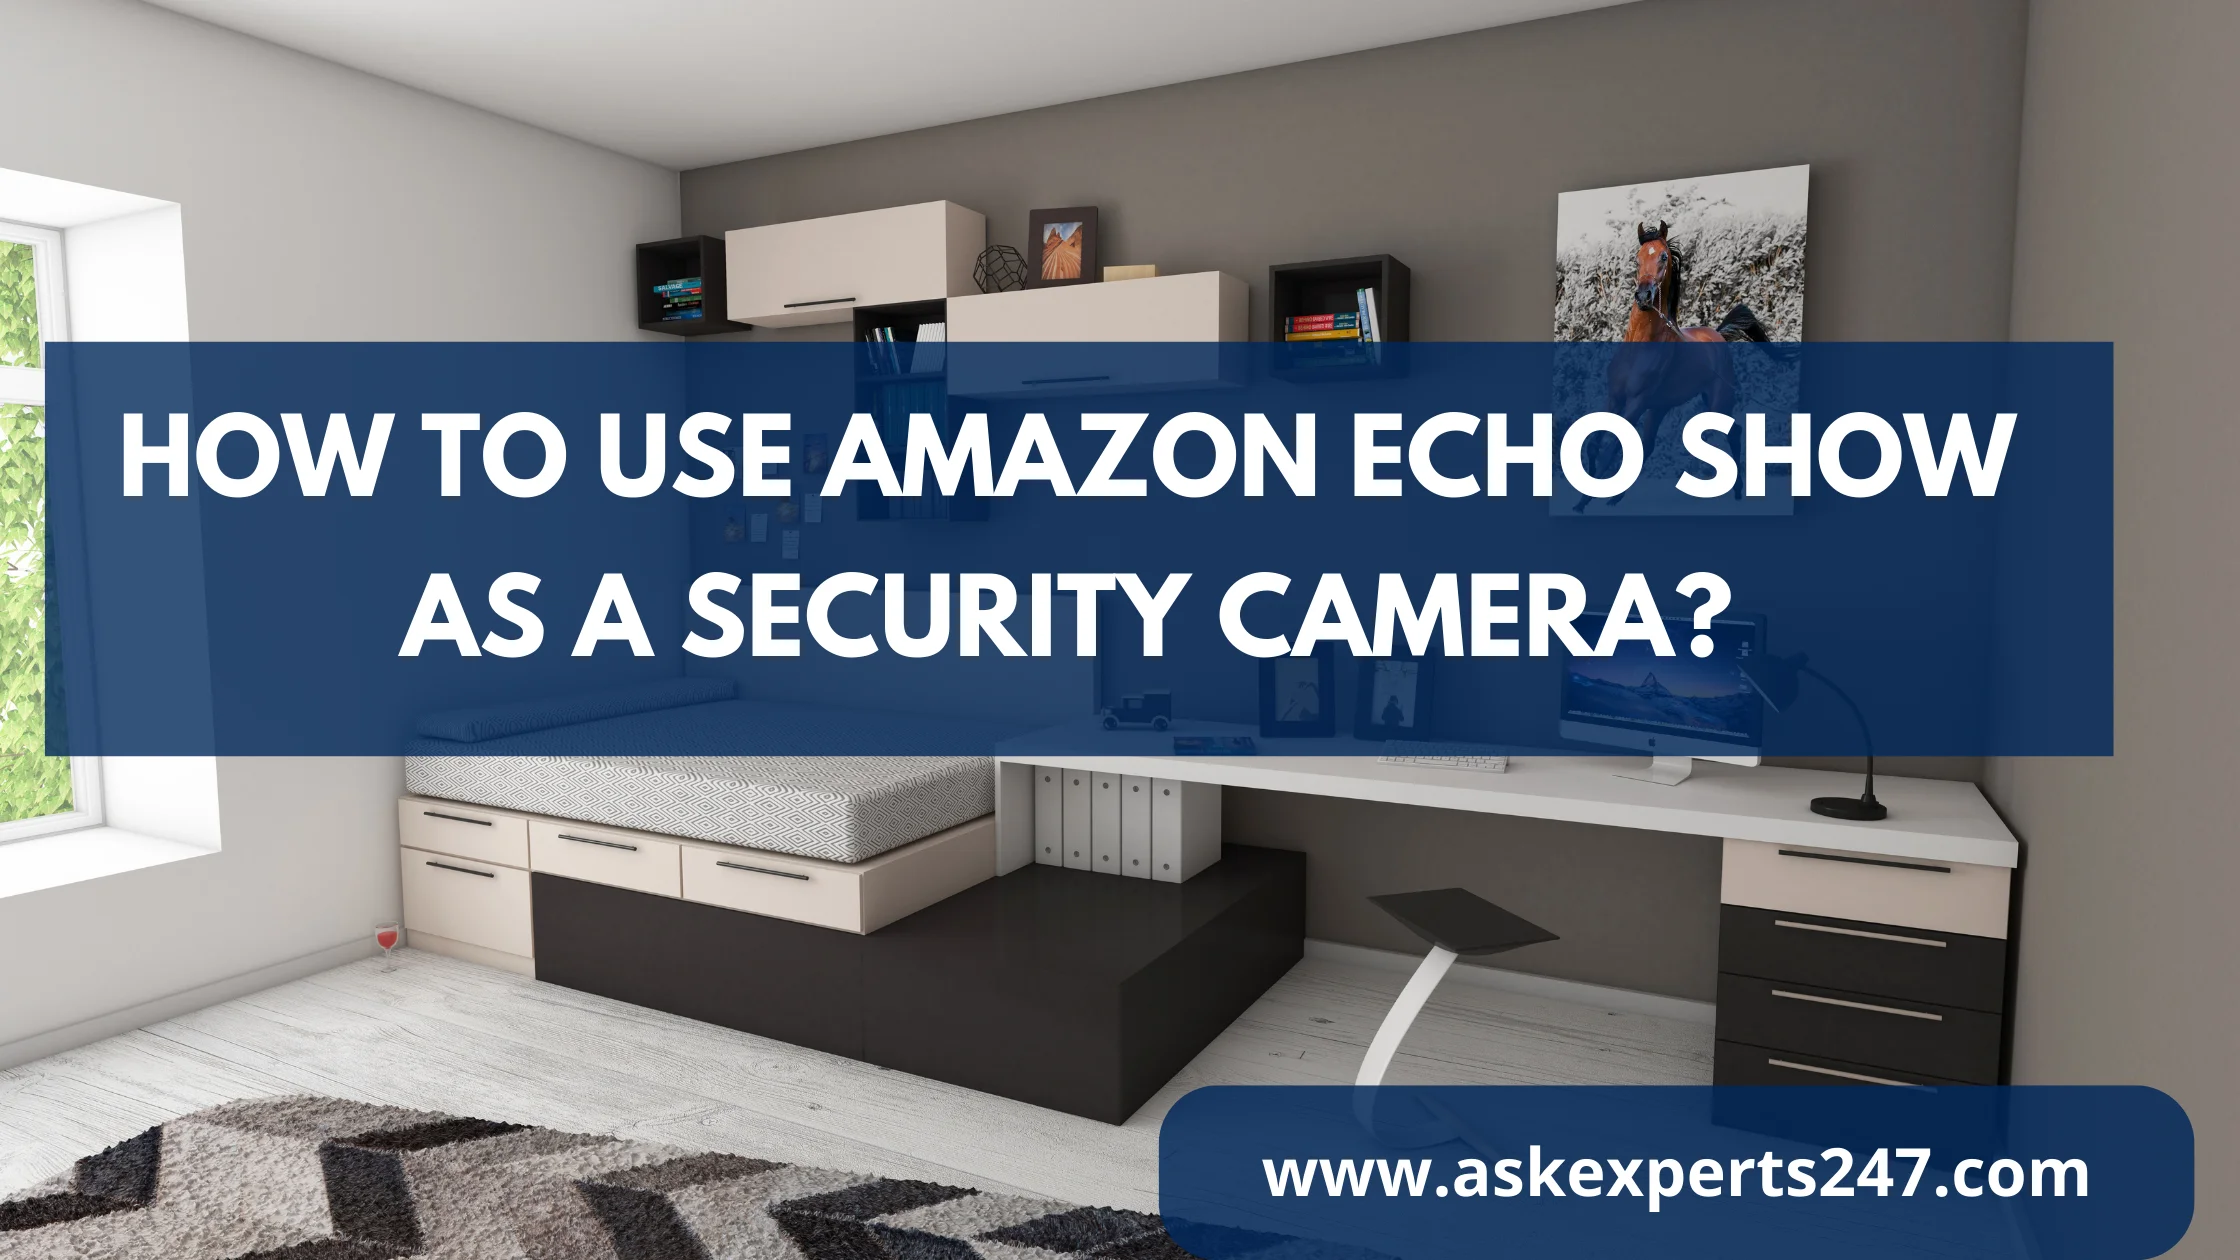 How to use Amazon echo show as a Security camera